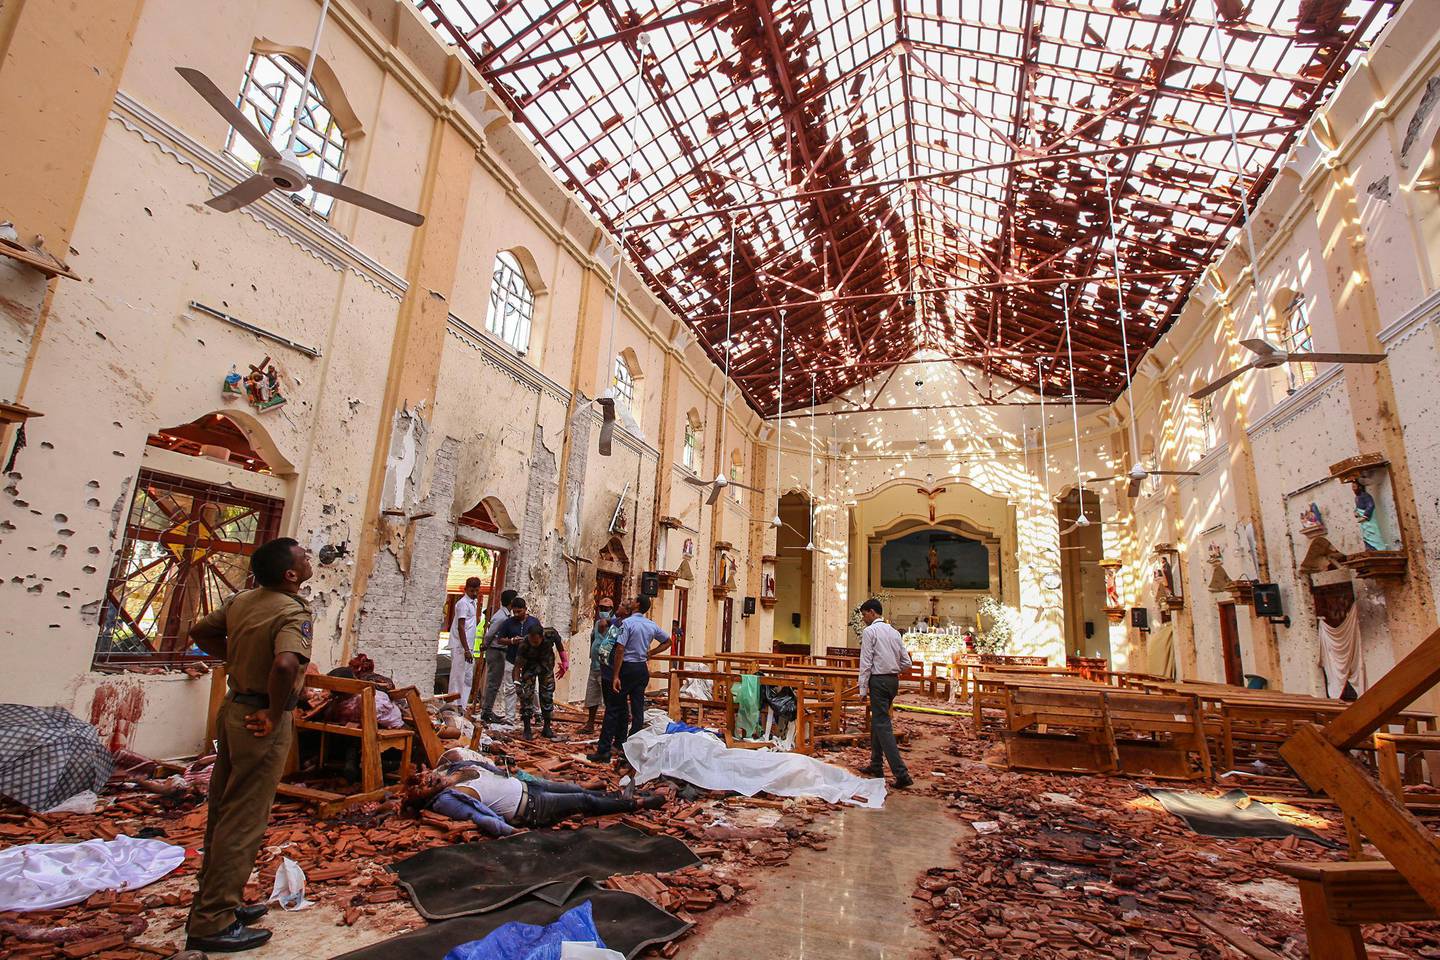 FILE - In this April 21, 2019, file photo, dead bodies of victims lie inside St. Sebastian's Church damaged in bomb blast in Negombo, north of Colombo, Sri Lanka. The Indian Ocean island nation of Sri Lanka, which will elect a new president on Saturday, Nov. 16, 2019 has had a tumultuous history. Since gaining independence from British colonial rule in 1948, the country has seen three major armed conflicts in which hundreds of thousands have died. It also has had its share of natural disasters. As it prepares to elect its seventh president, Sri Lanka remains a divided nation, with ethnic, political and economic issues unresolved. (AP Photo/Chamila Karunarathne, File)